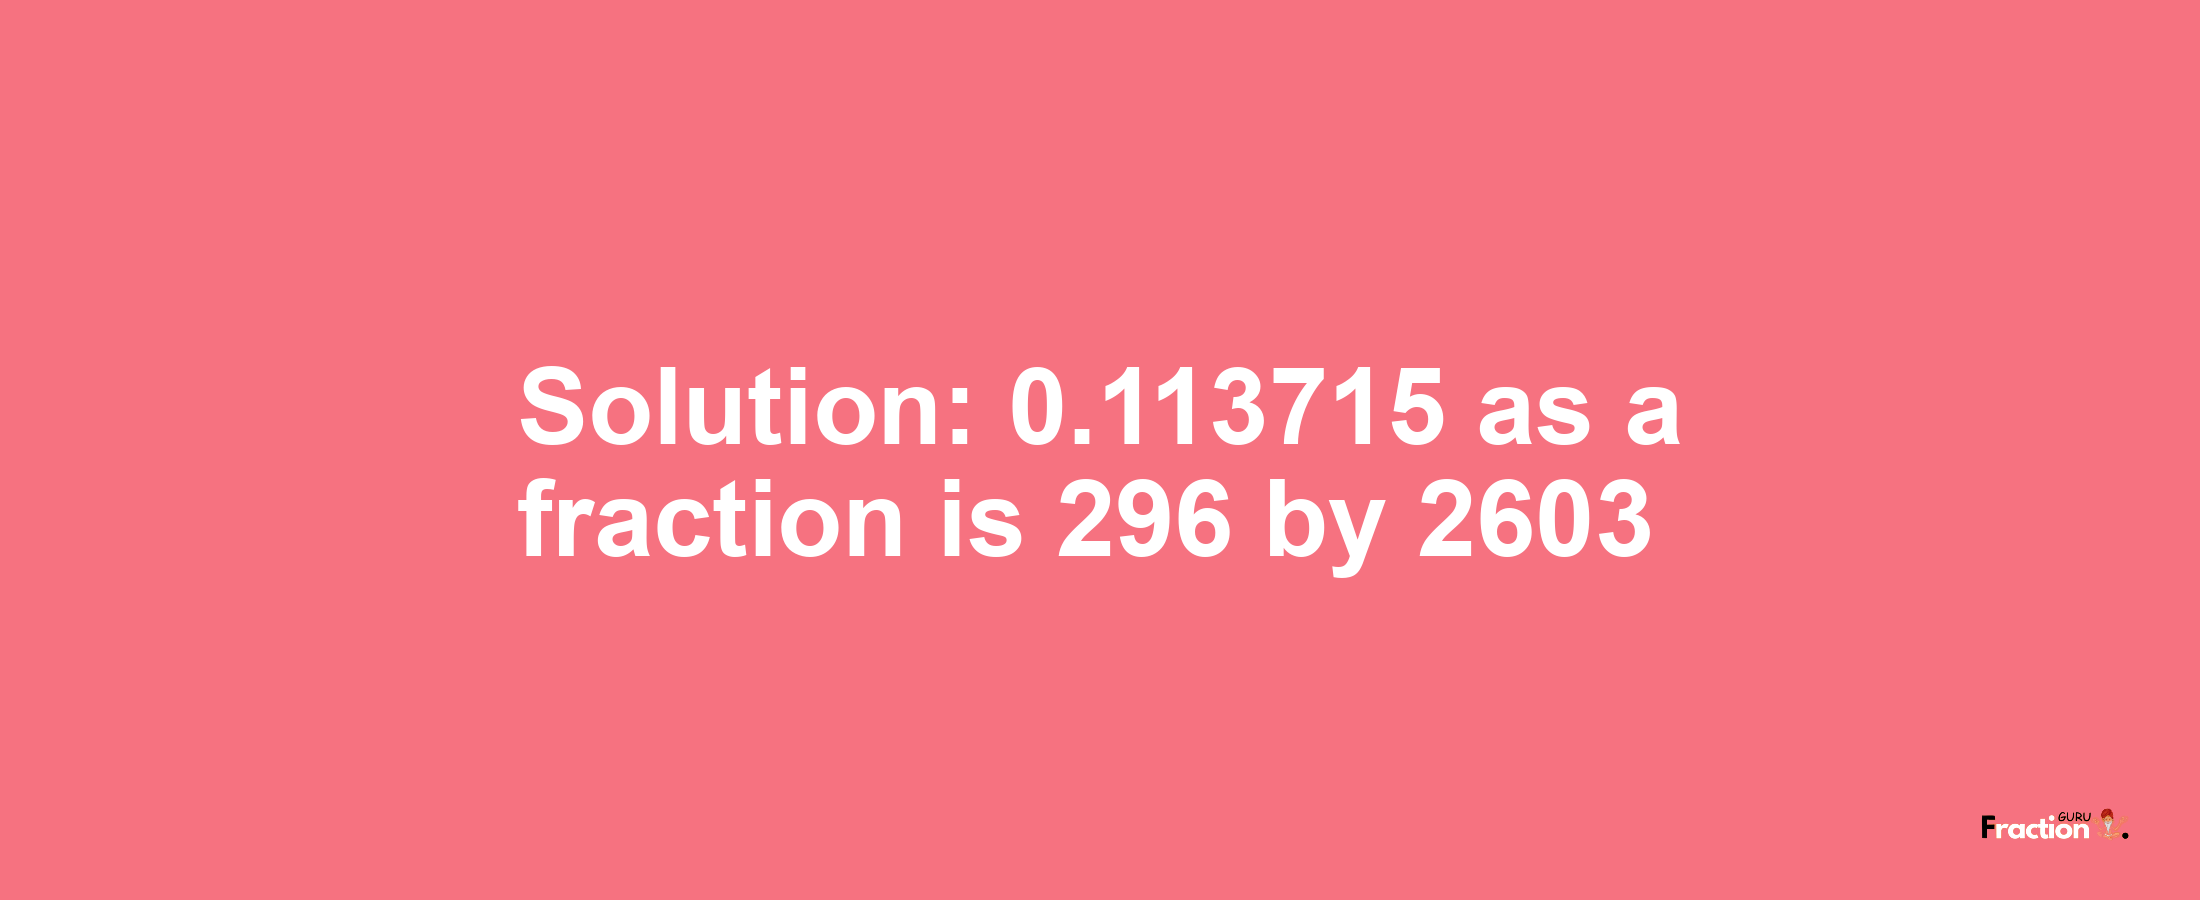 Solution:0.113715 as a fraction is 296/2603